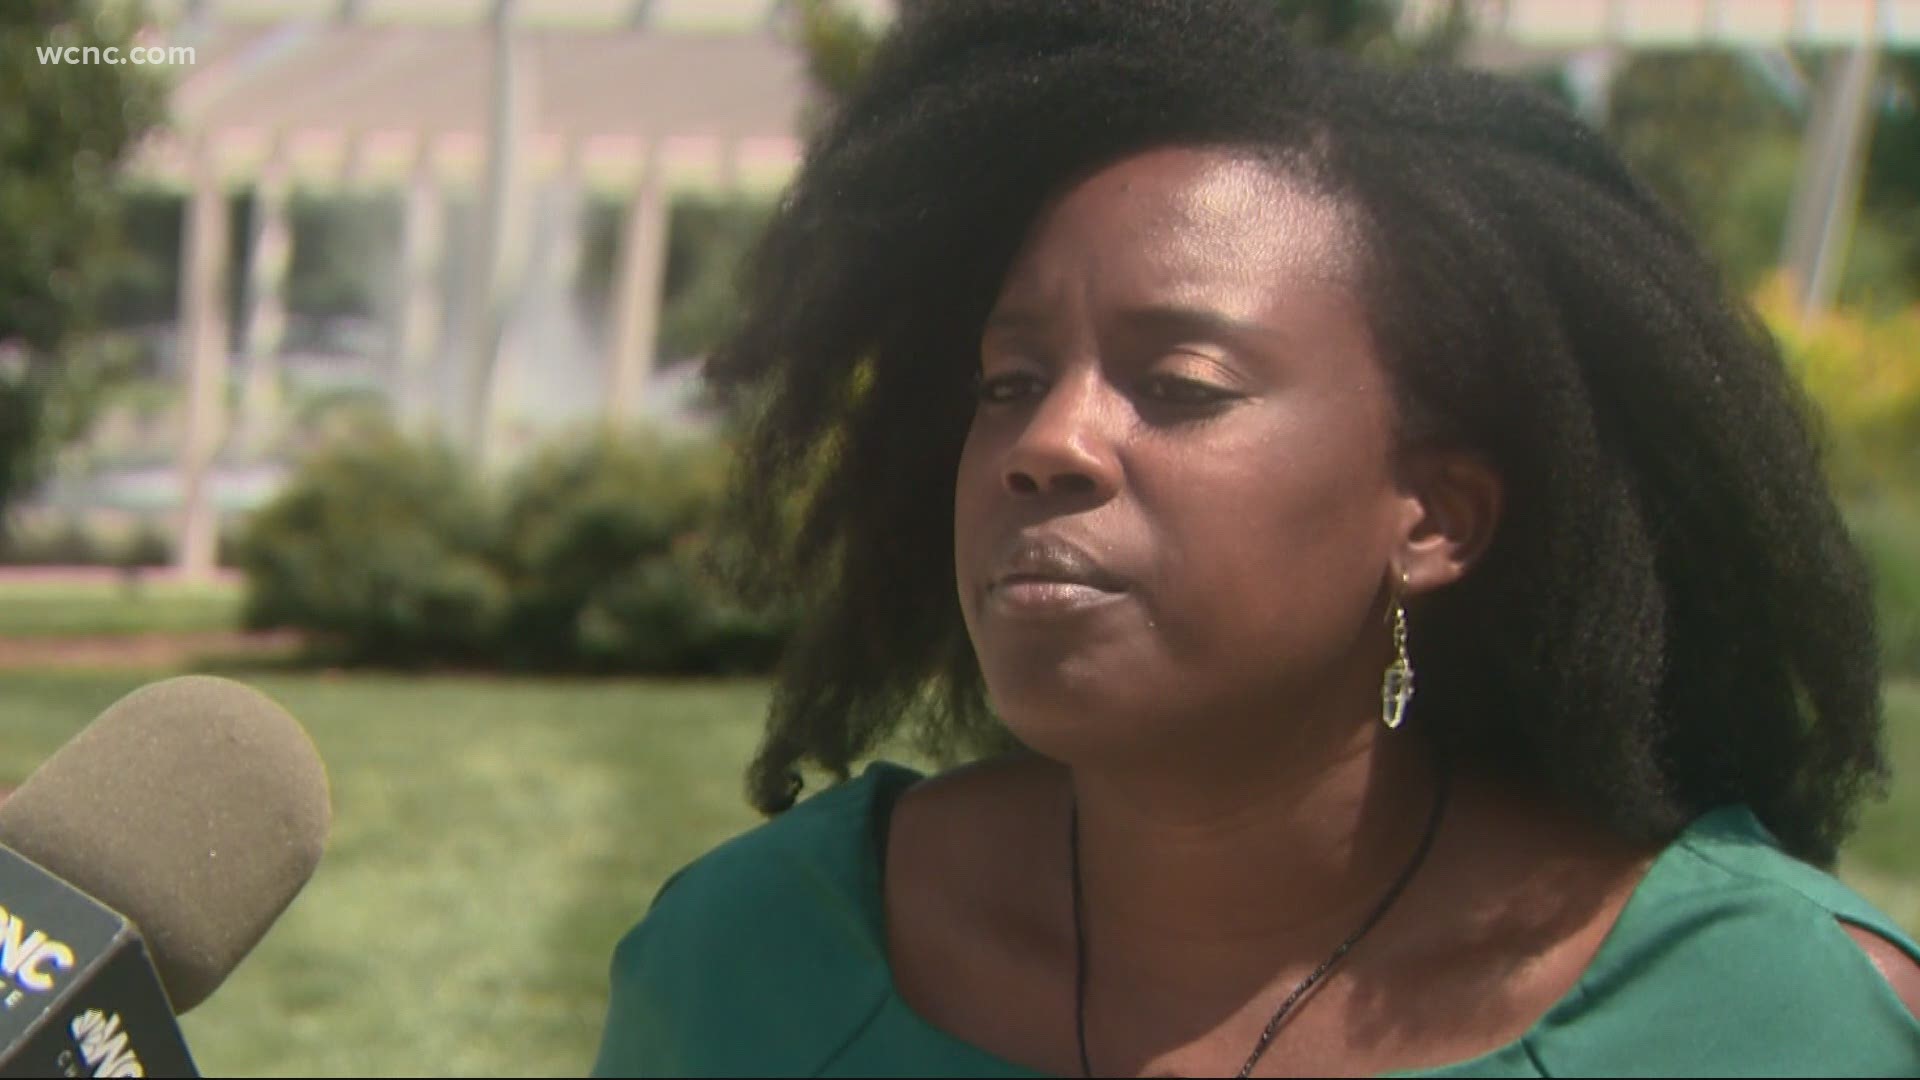 Briana Harper hears exclusively from a woman who was mistaken by Charlotte police for a suspect.